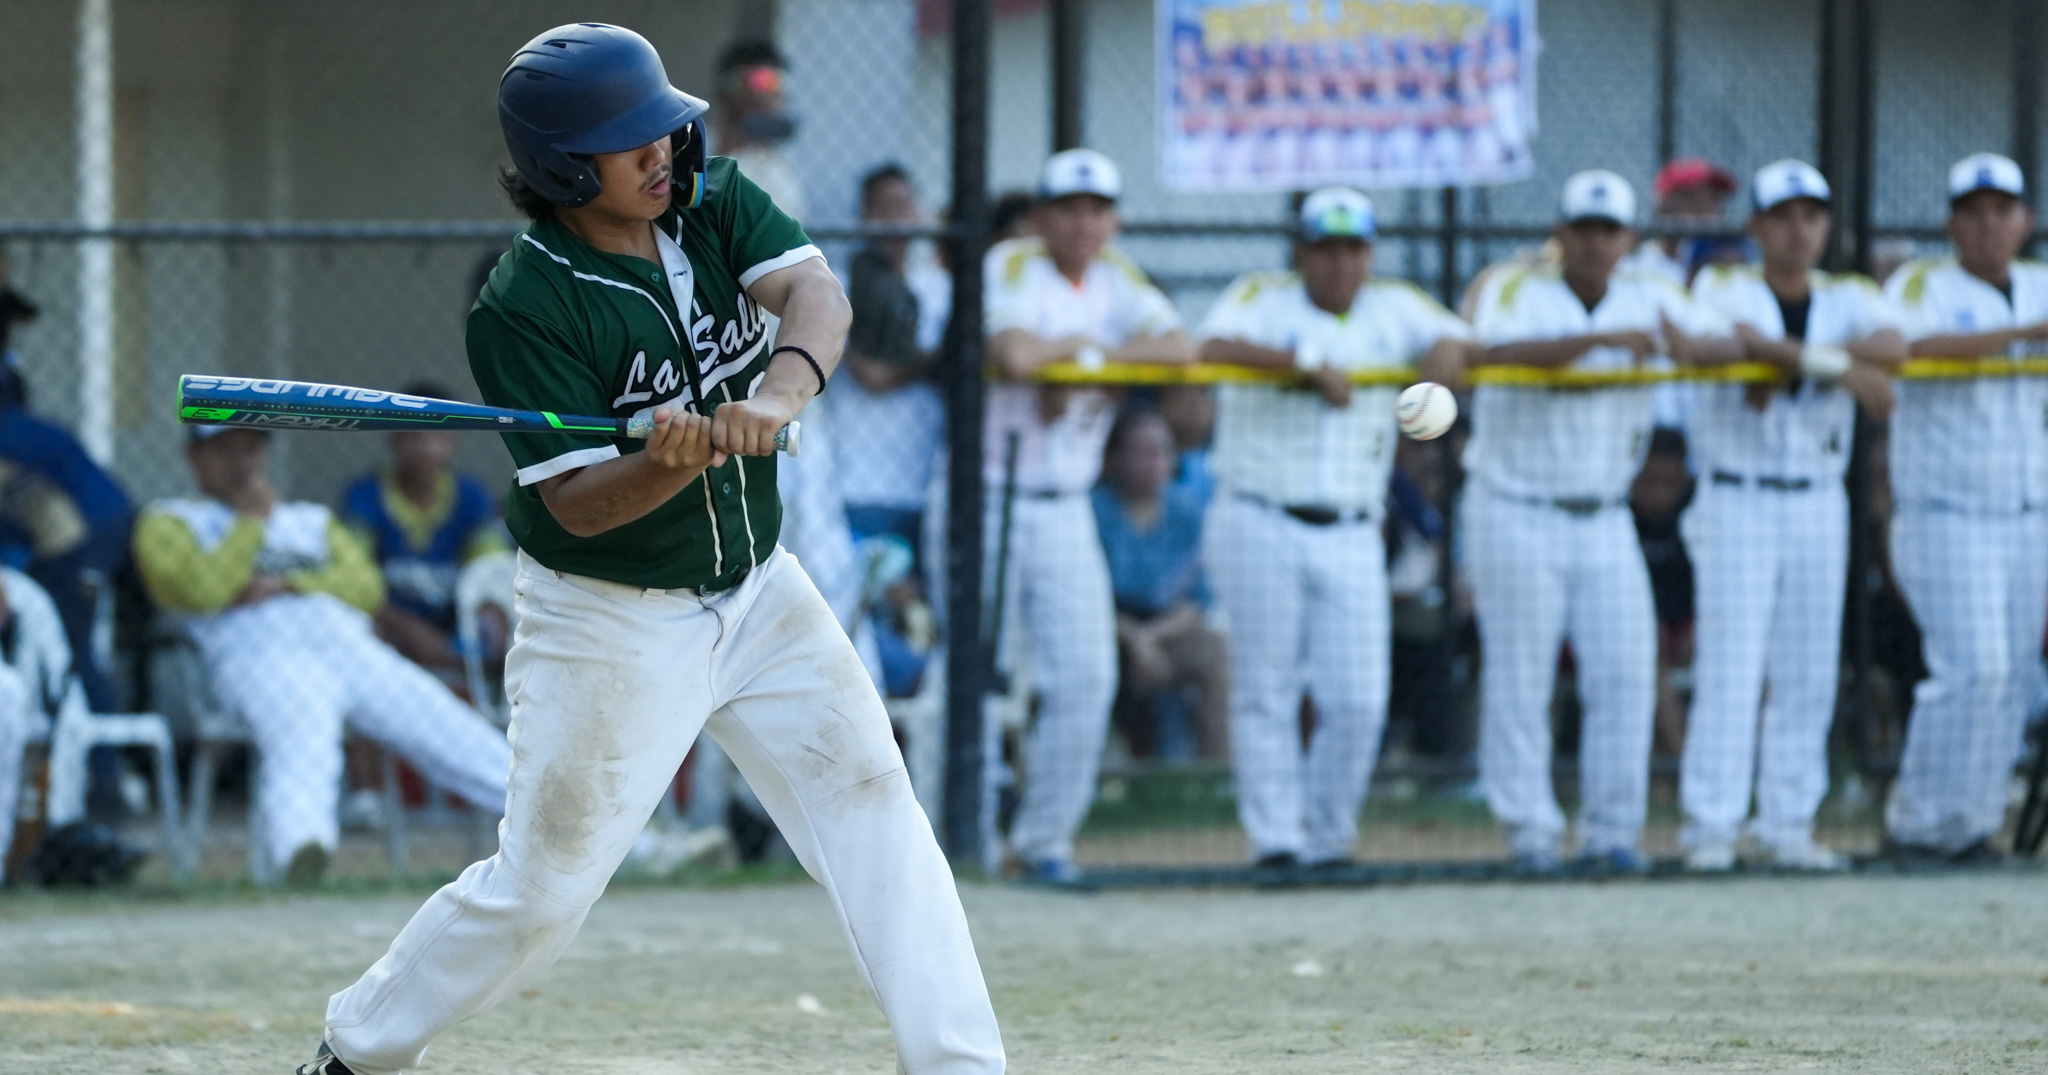 UAAP: Green Batters drop three-peat chance, bow down to NU after 4-2 loss in Game Two of the Finals